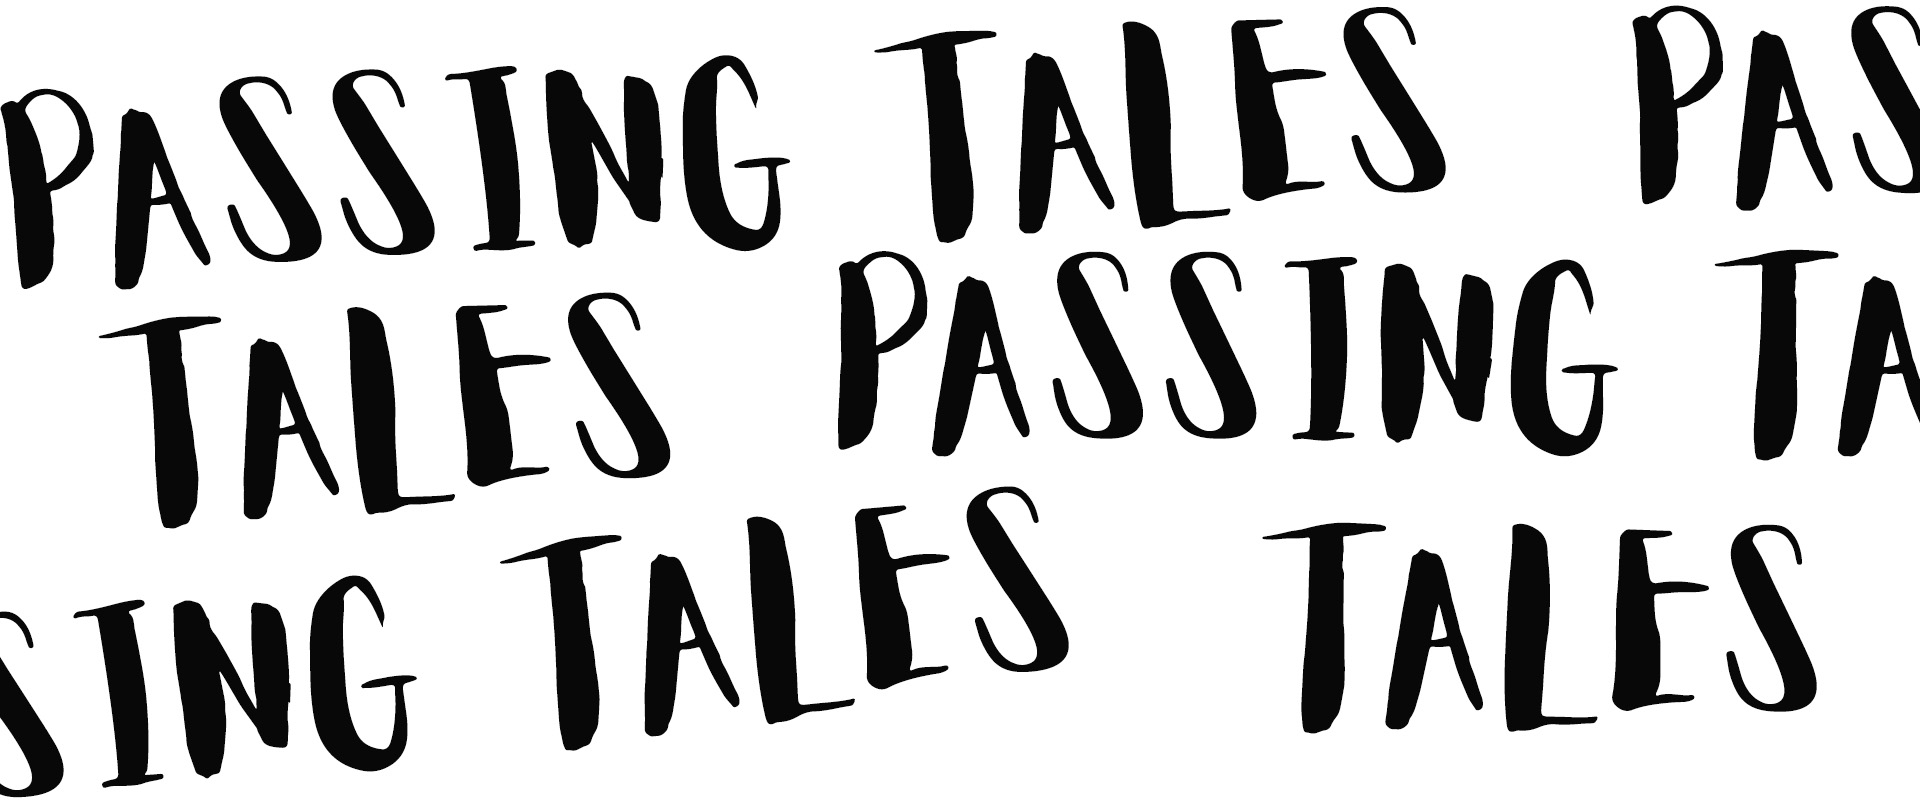 Passing Tales